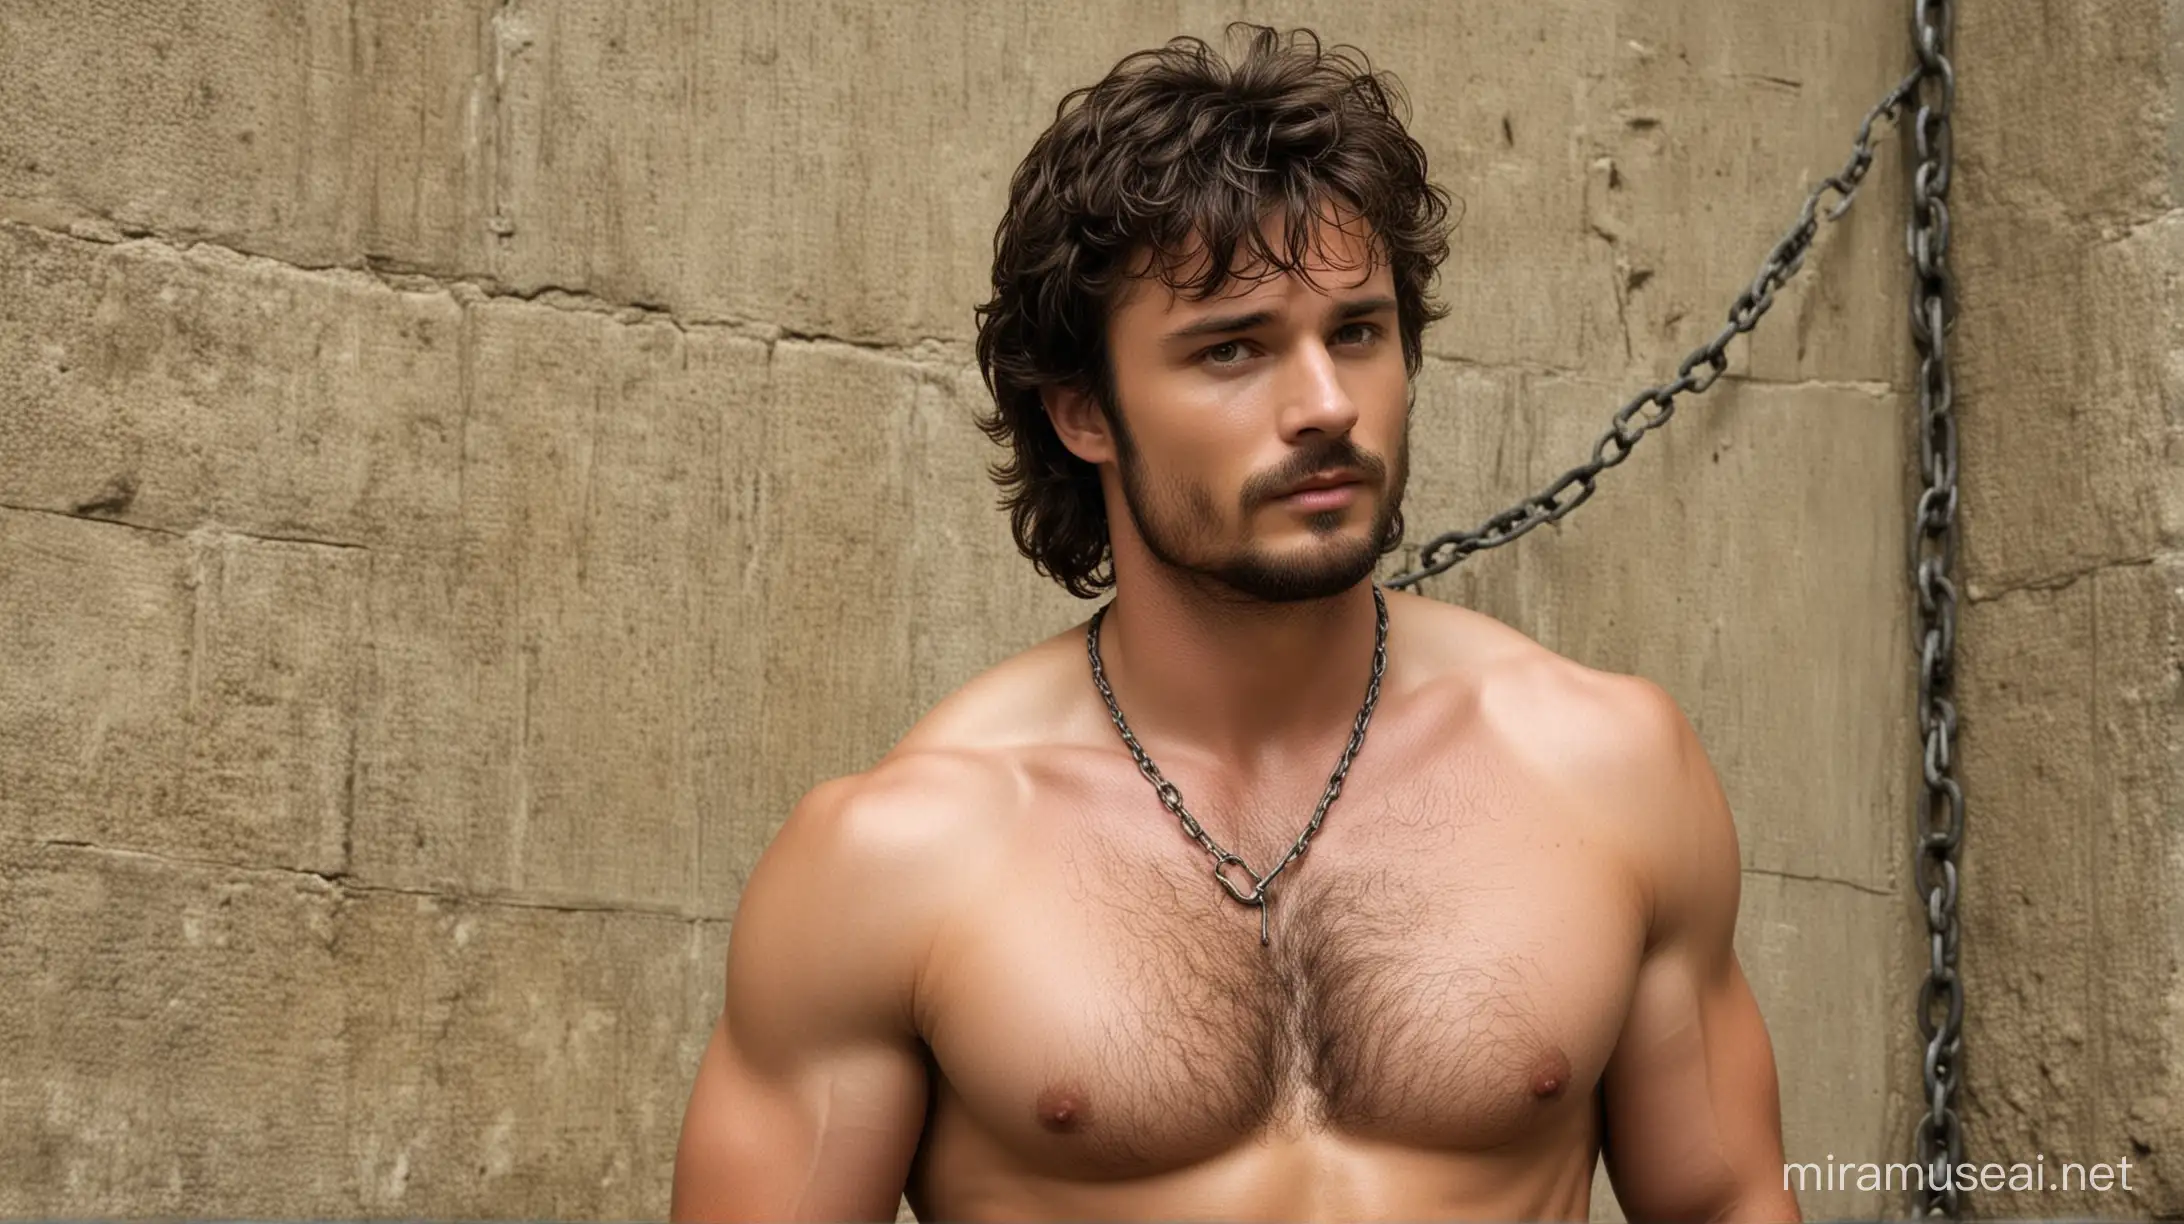 Old prison. Hairy furry teenage version of actor Tom Welling, aged 15, but with a lot of beard and a very hairy body. Welling is a prisoner, arms raised and stretched, showing very hairy armpits, wrists bound with shackles and tied with chains to the prison wall, green eyes, shirtless, very hairy chest like in the past, short hair, serious expression, bearded, body and very hairy chest.